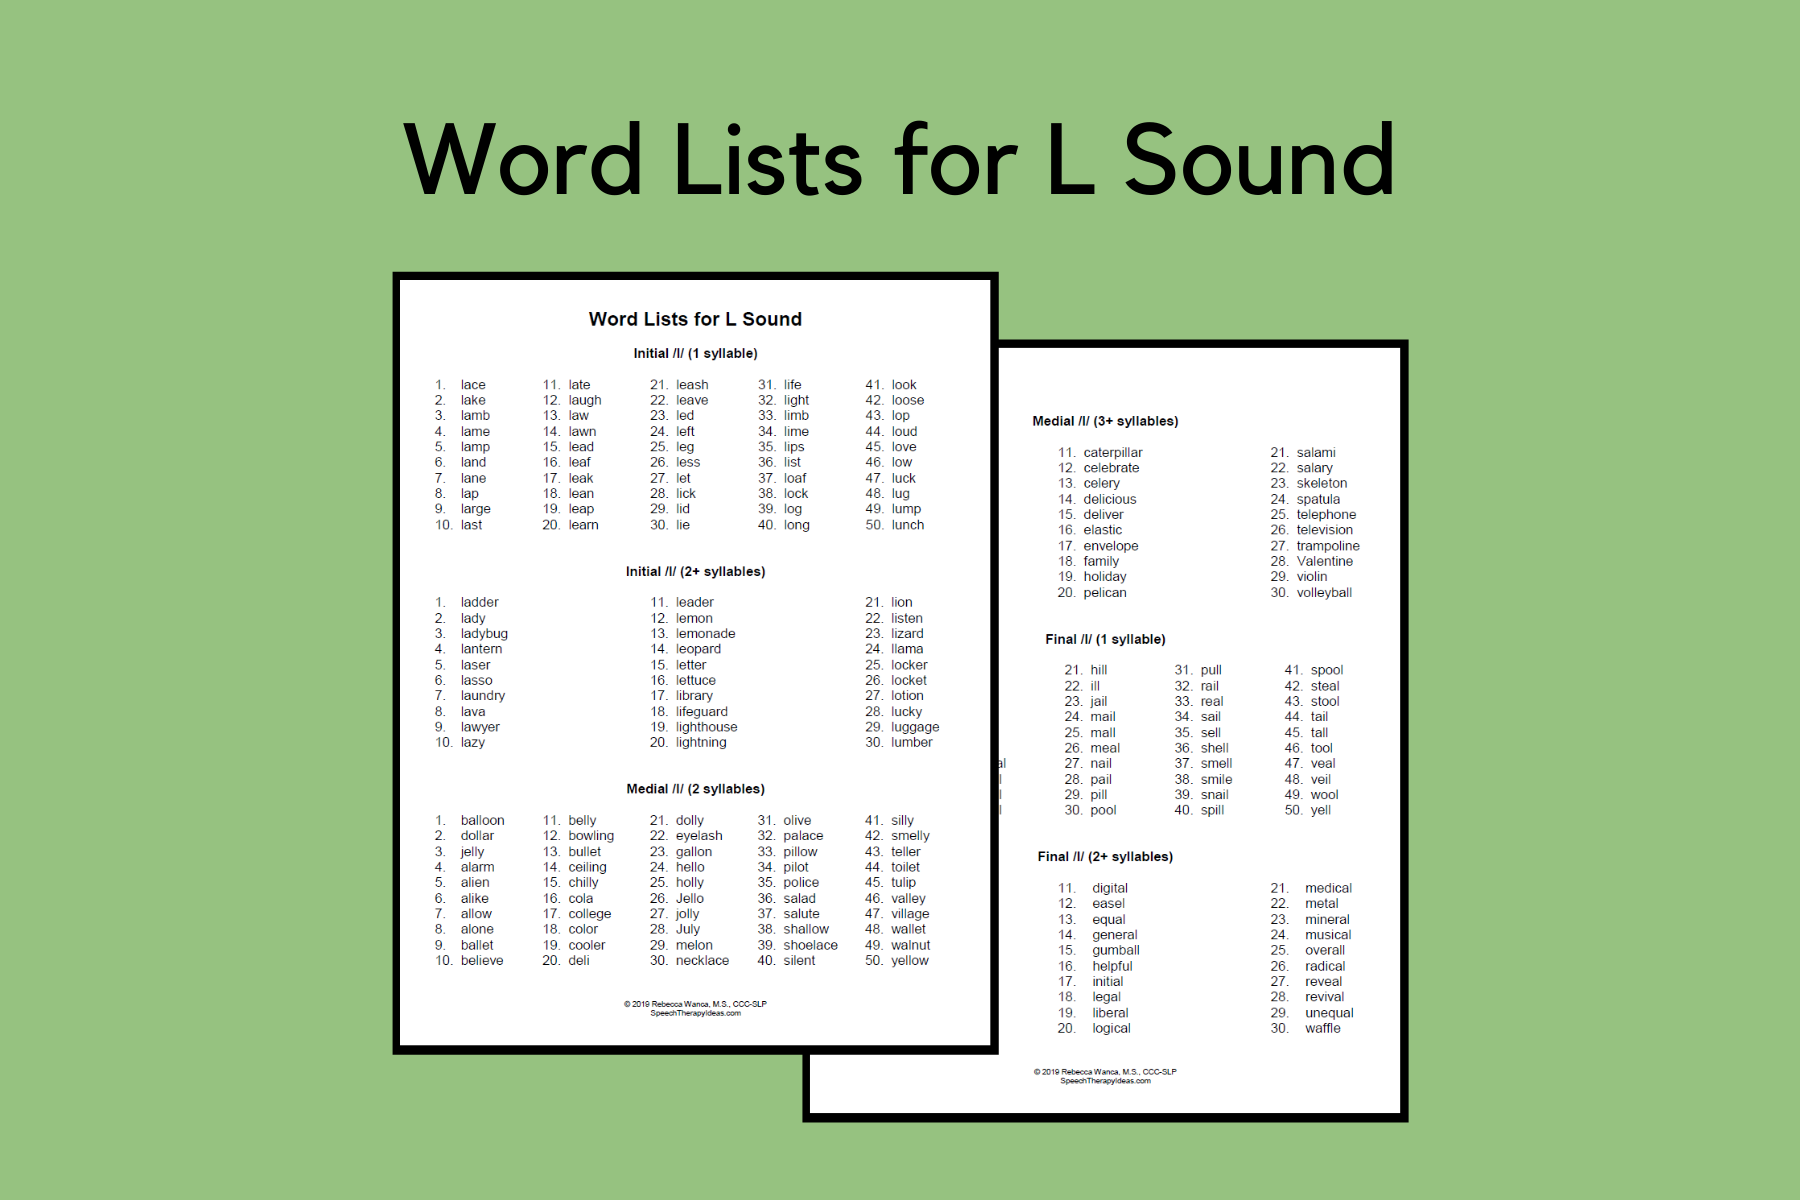 Word Lists for L Sound